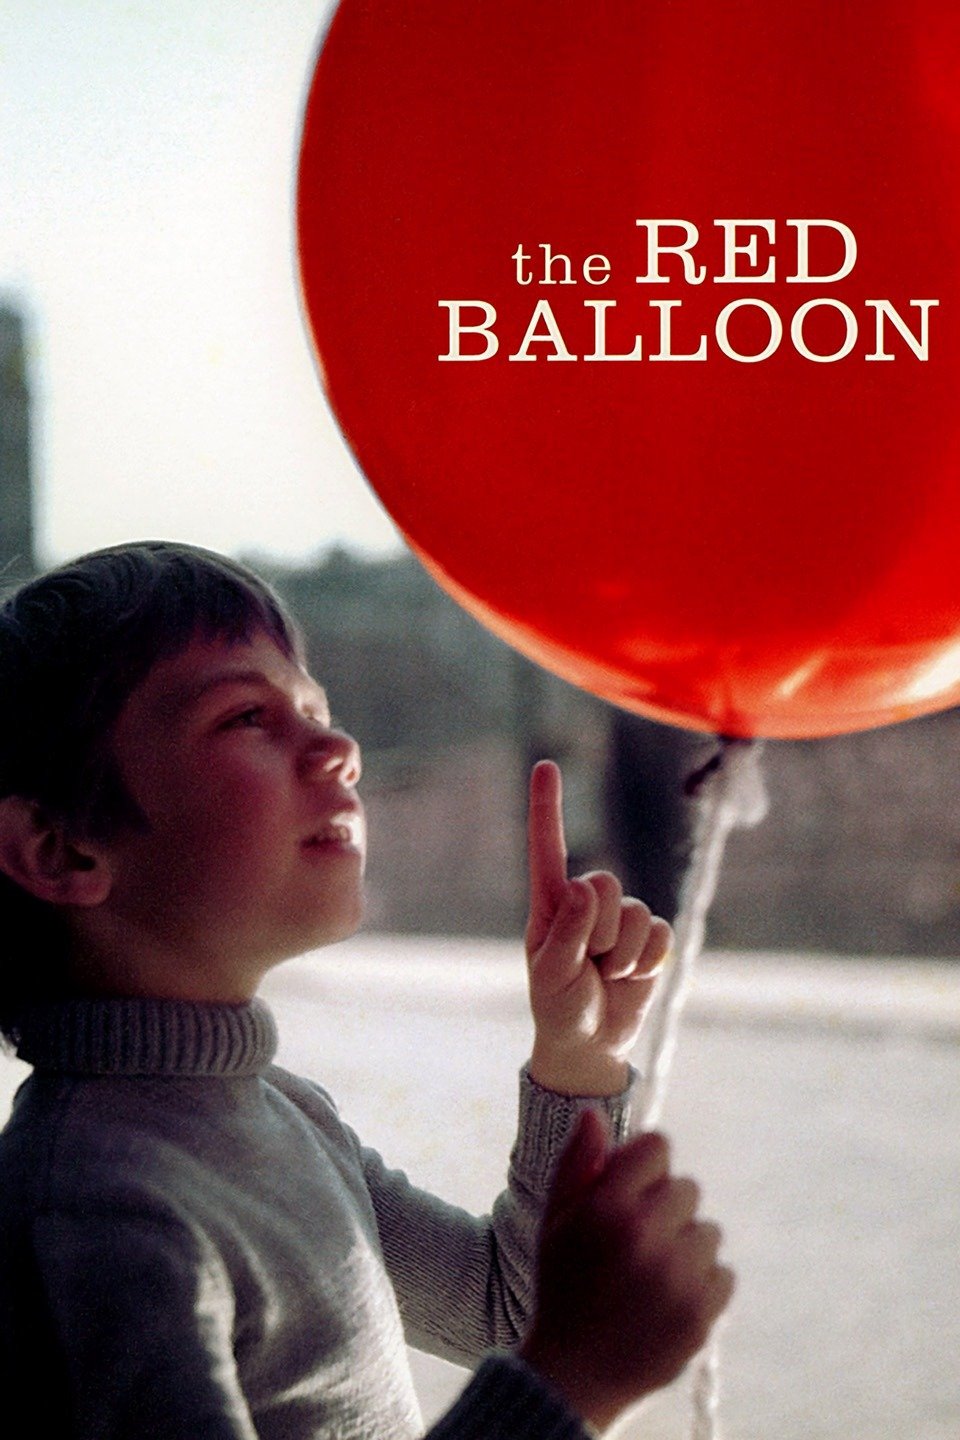 red balloon movie review